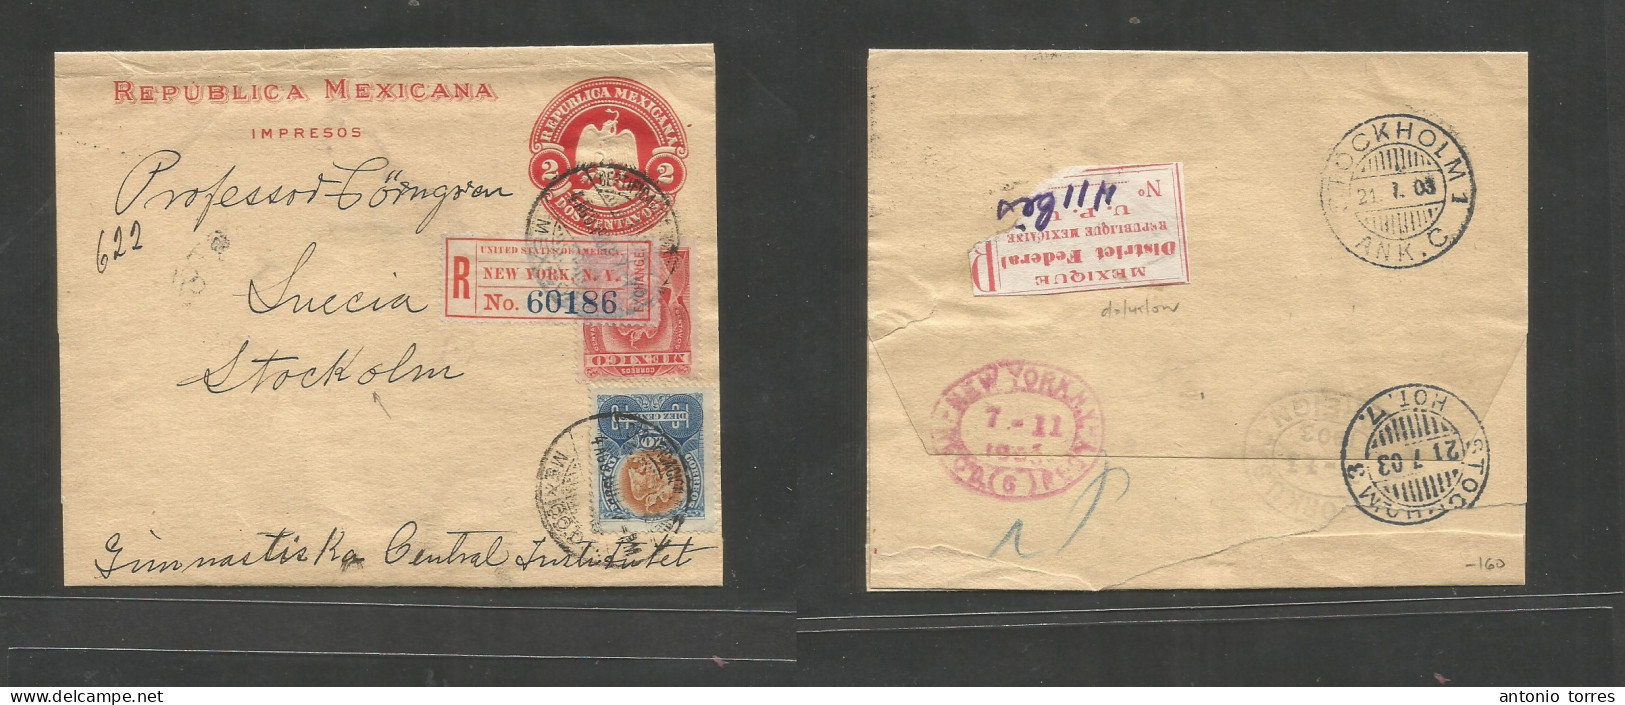 Mexico - Stationery. 1903 (4 Aug) DF - Sweden, Stockholm (21 July 03) Via NYC. Registered 2c Red Complete Stat Wrapper + - Messico